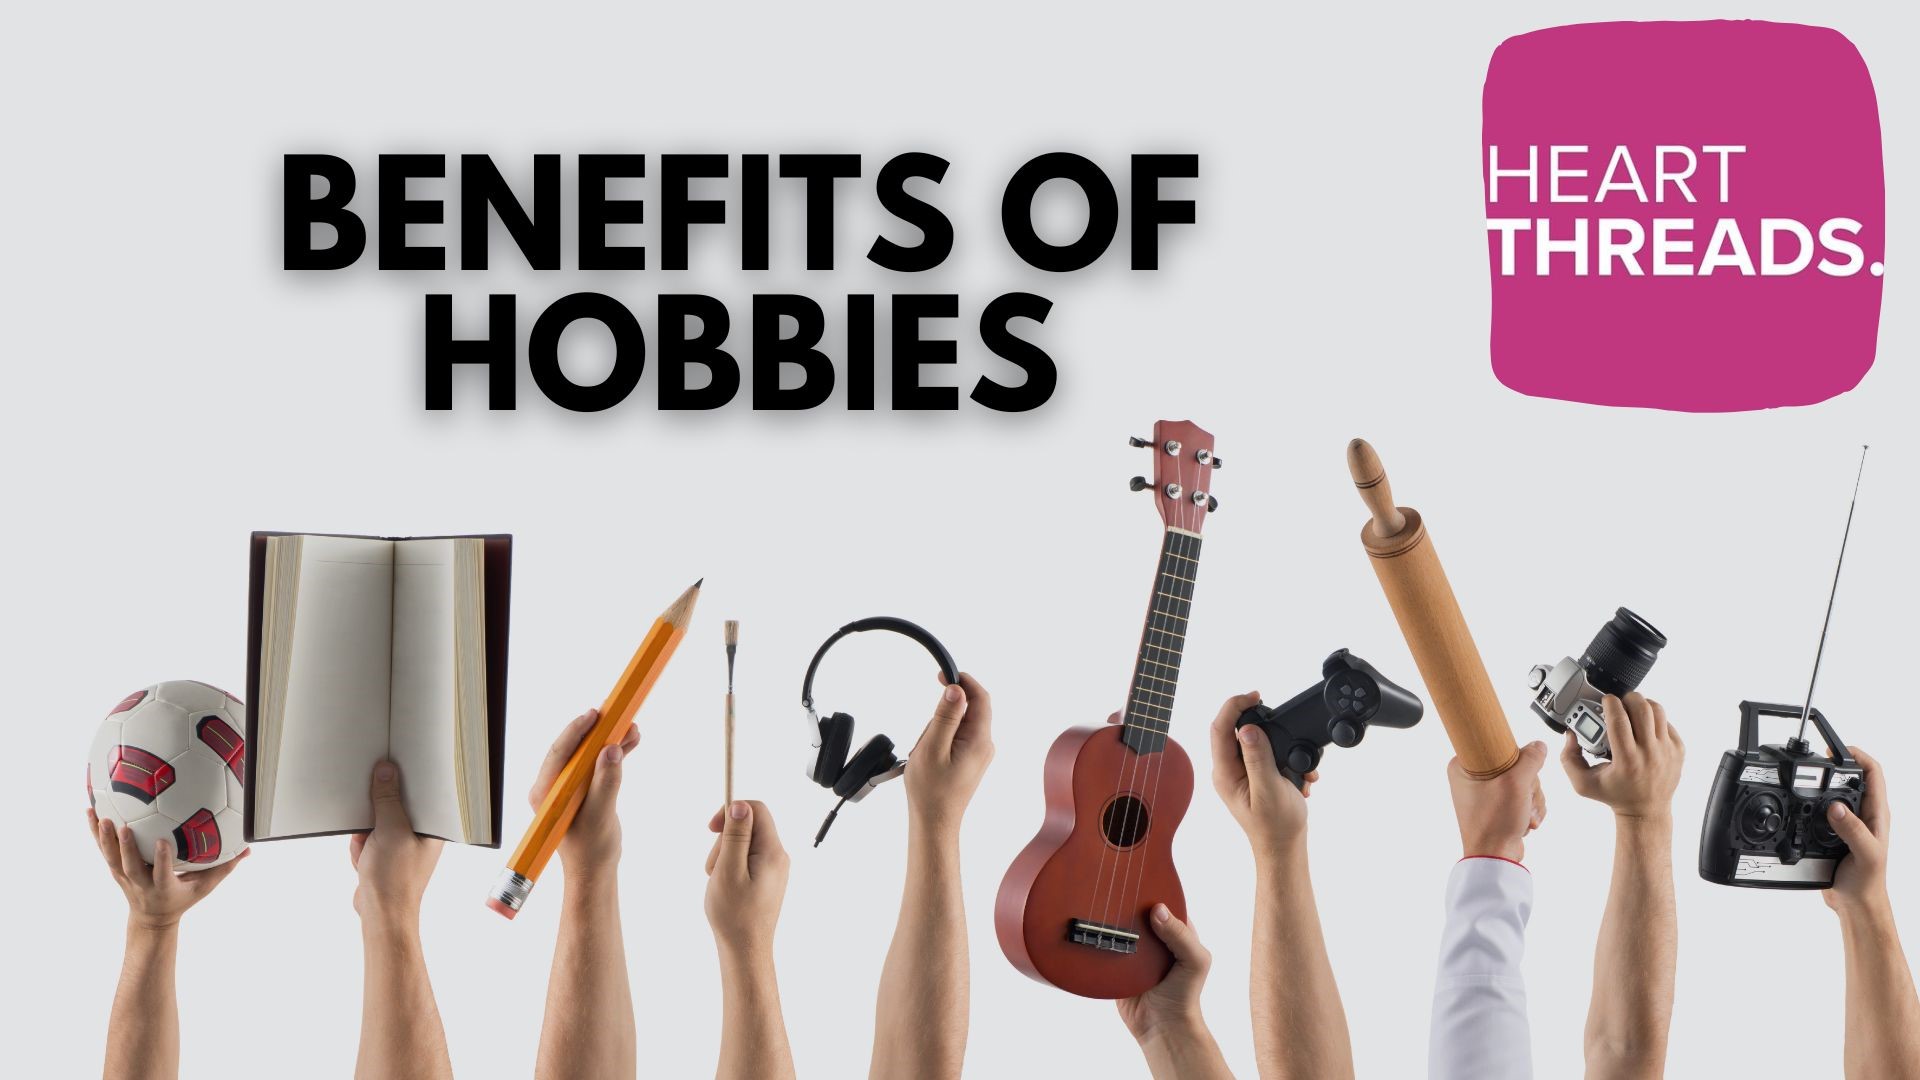 Hobbies are beneficial not only for you, but for other members of society as well! How hobbies from knitting to photography are helping others.